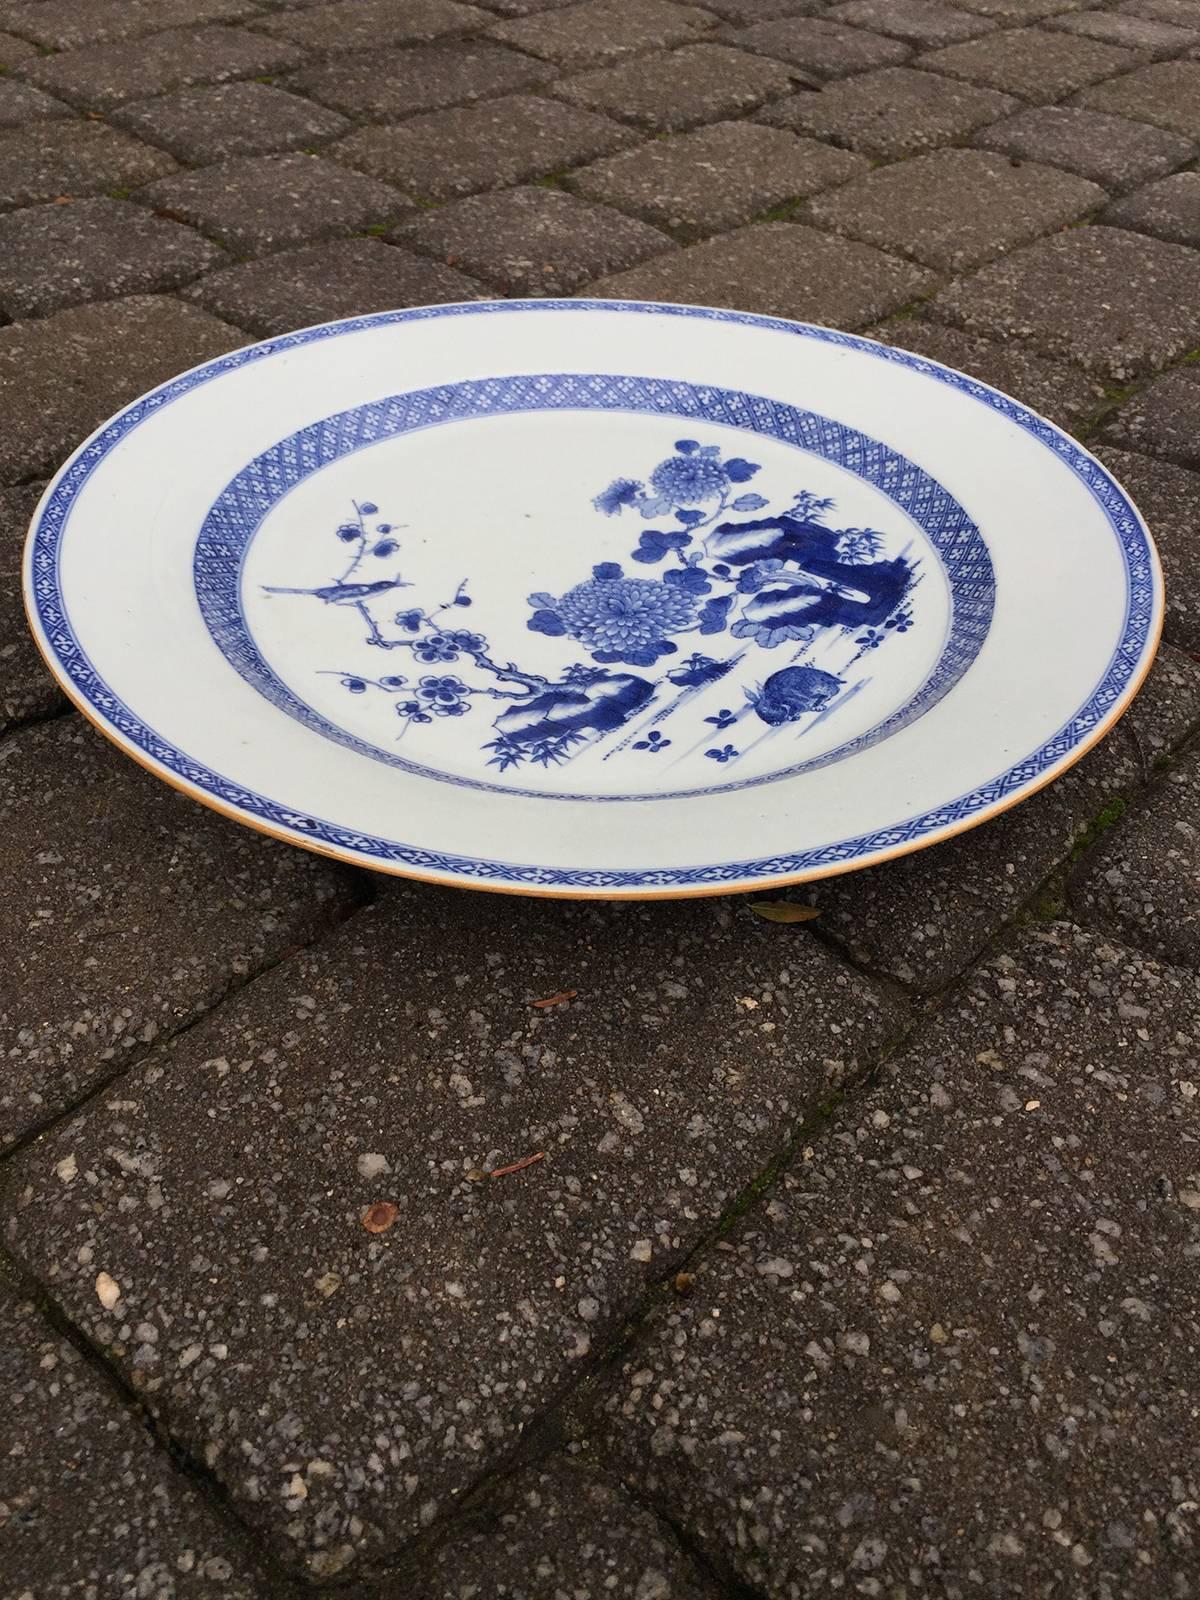 18th century Chinese blue and white plate with rabbit.